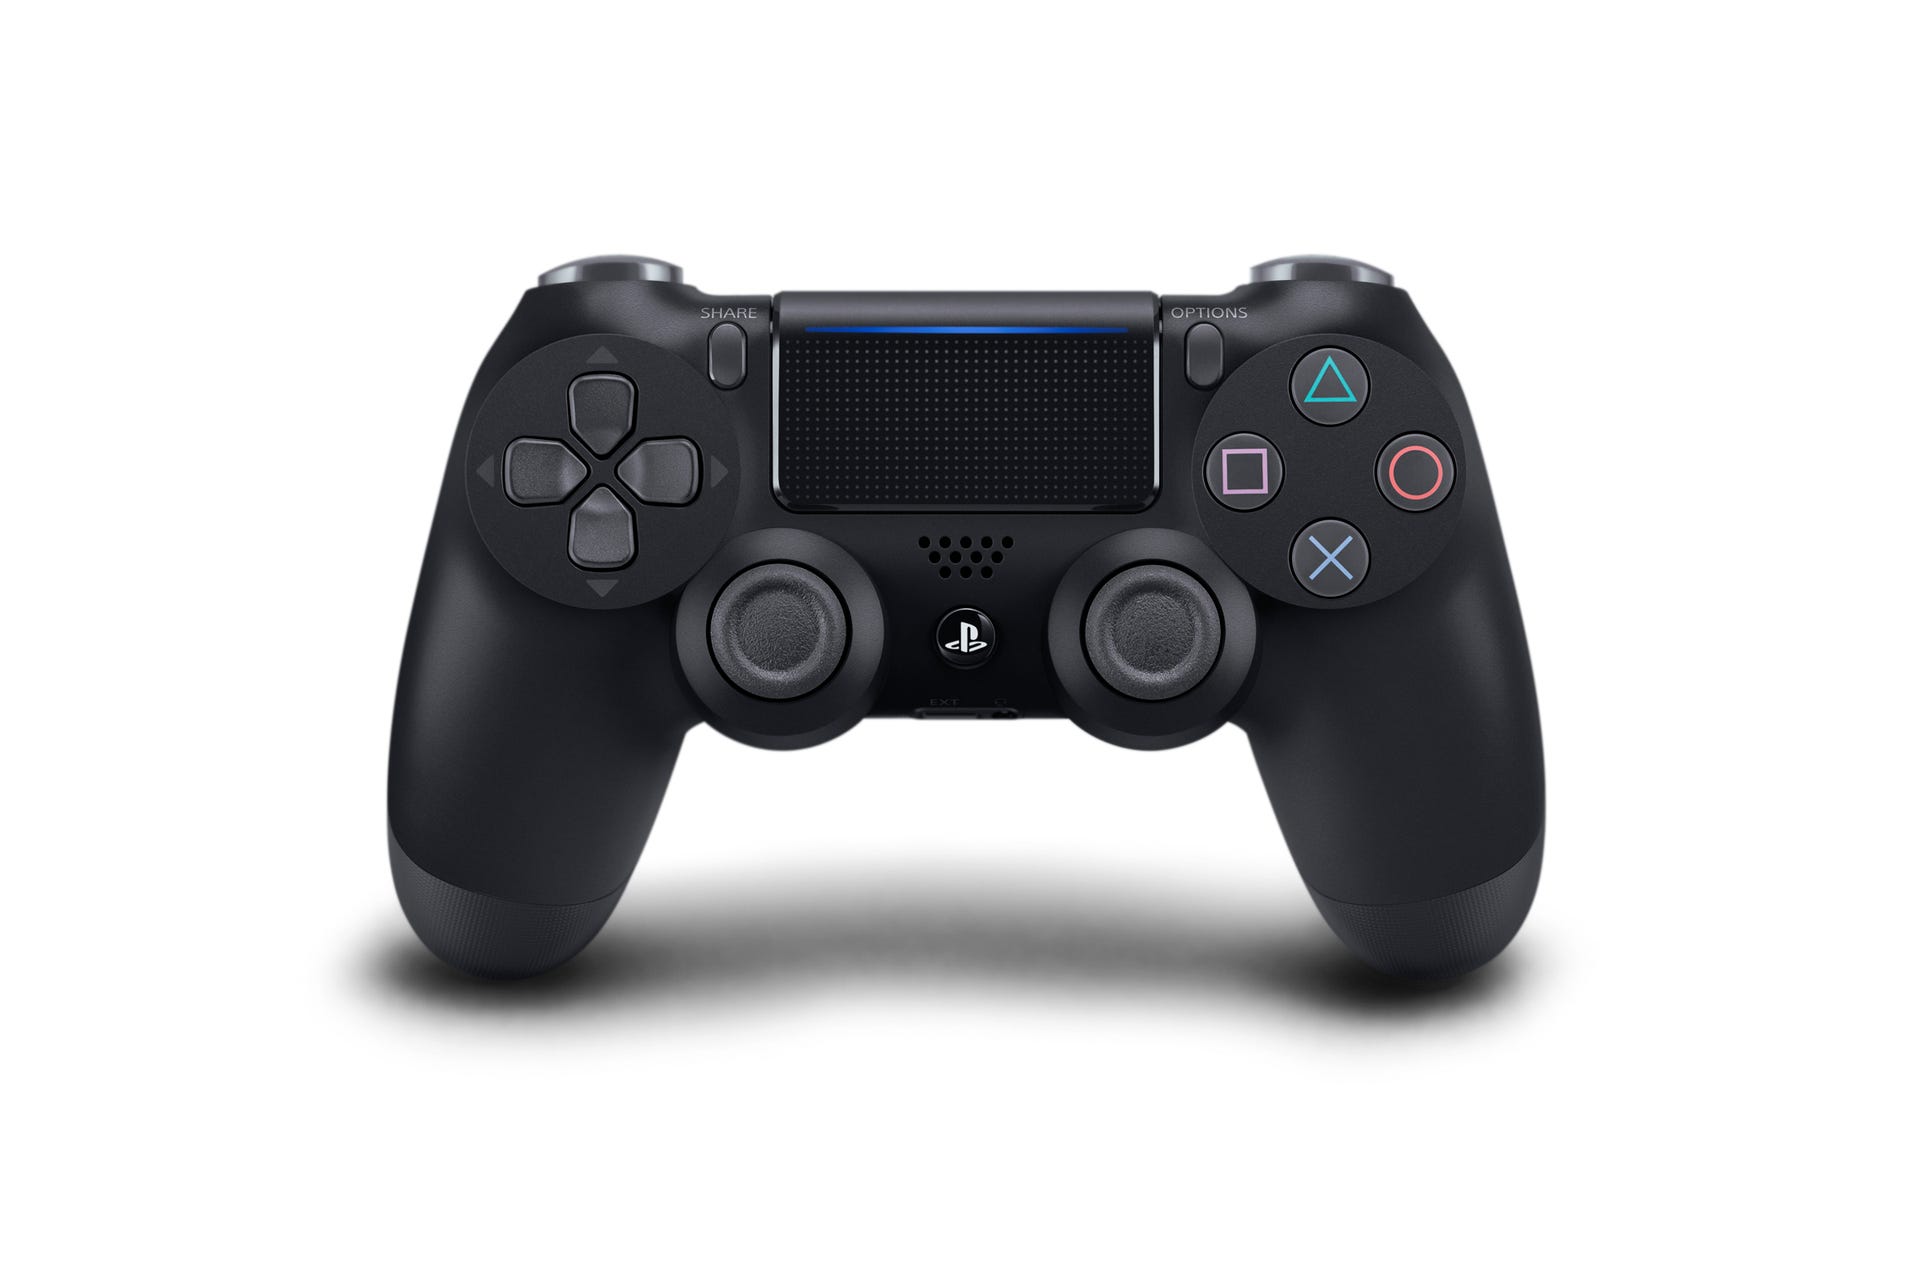 Duiker tragedie bevind zich Here's a look at the new DualShock4, PlayStation Camera and Vertical Stand for  PS4 Pro and Slim | VG247